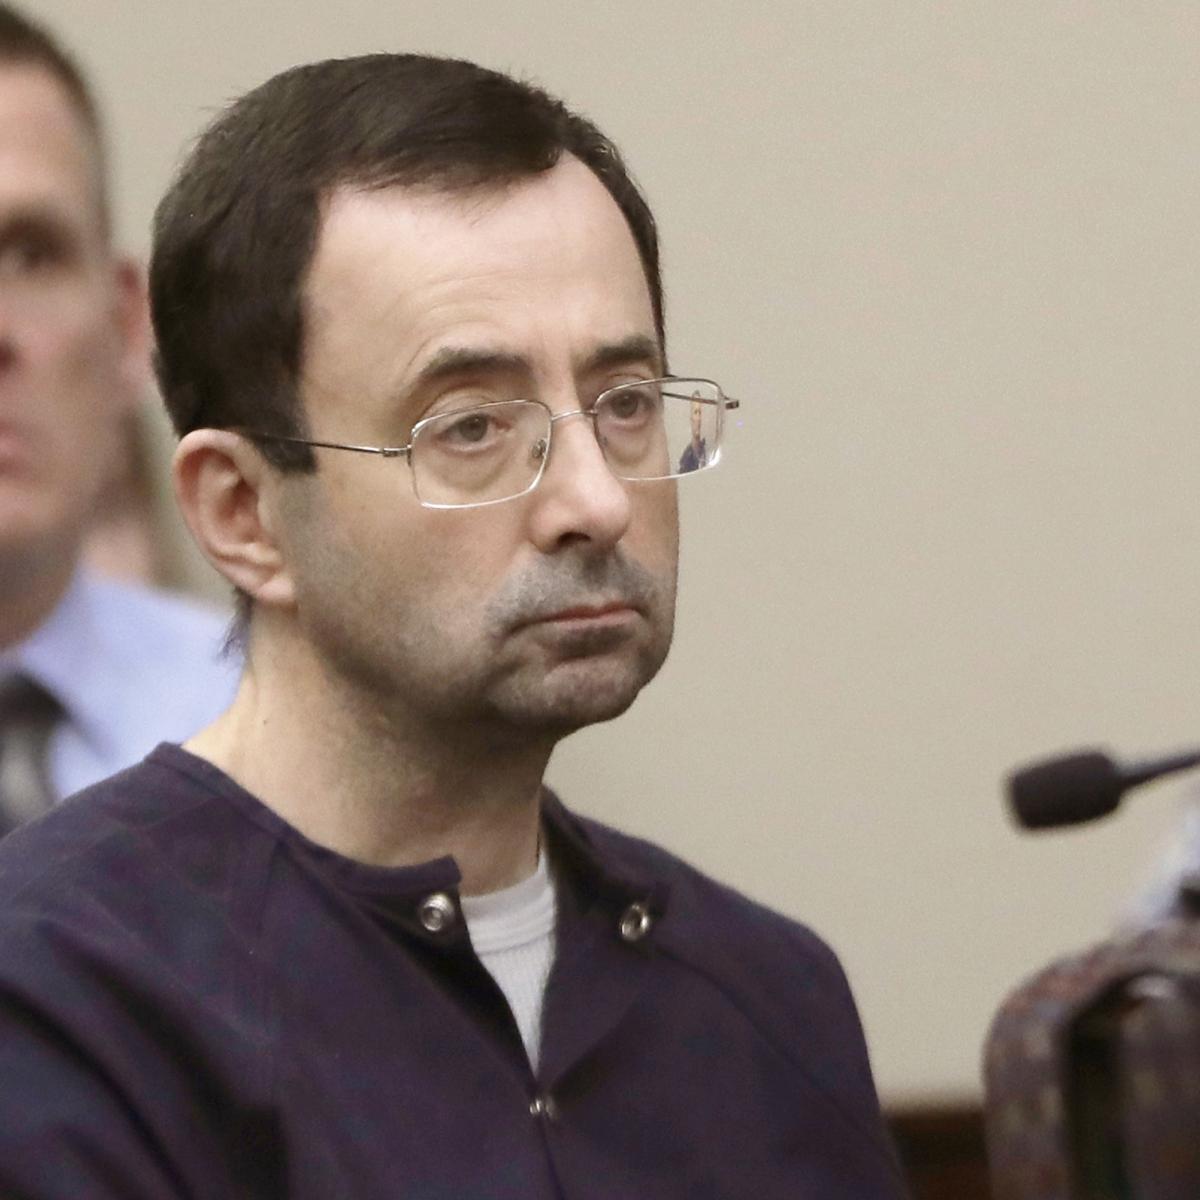 USOPC Suing Insurance Carriers for Allegedly Delaying Larry Nassar Settlements | Bleacher Report